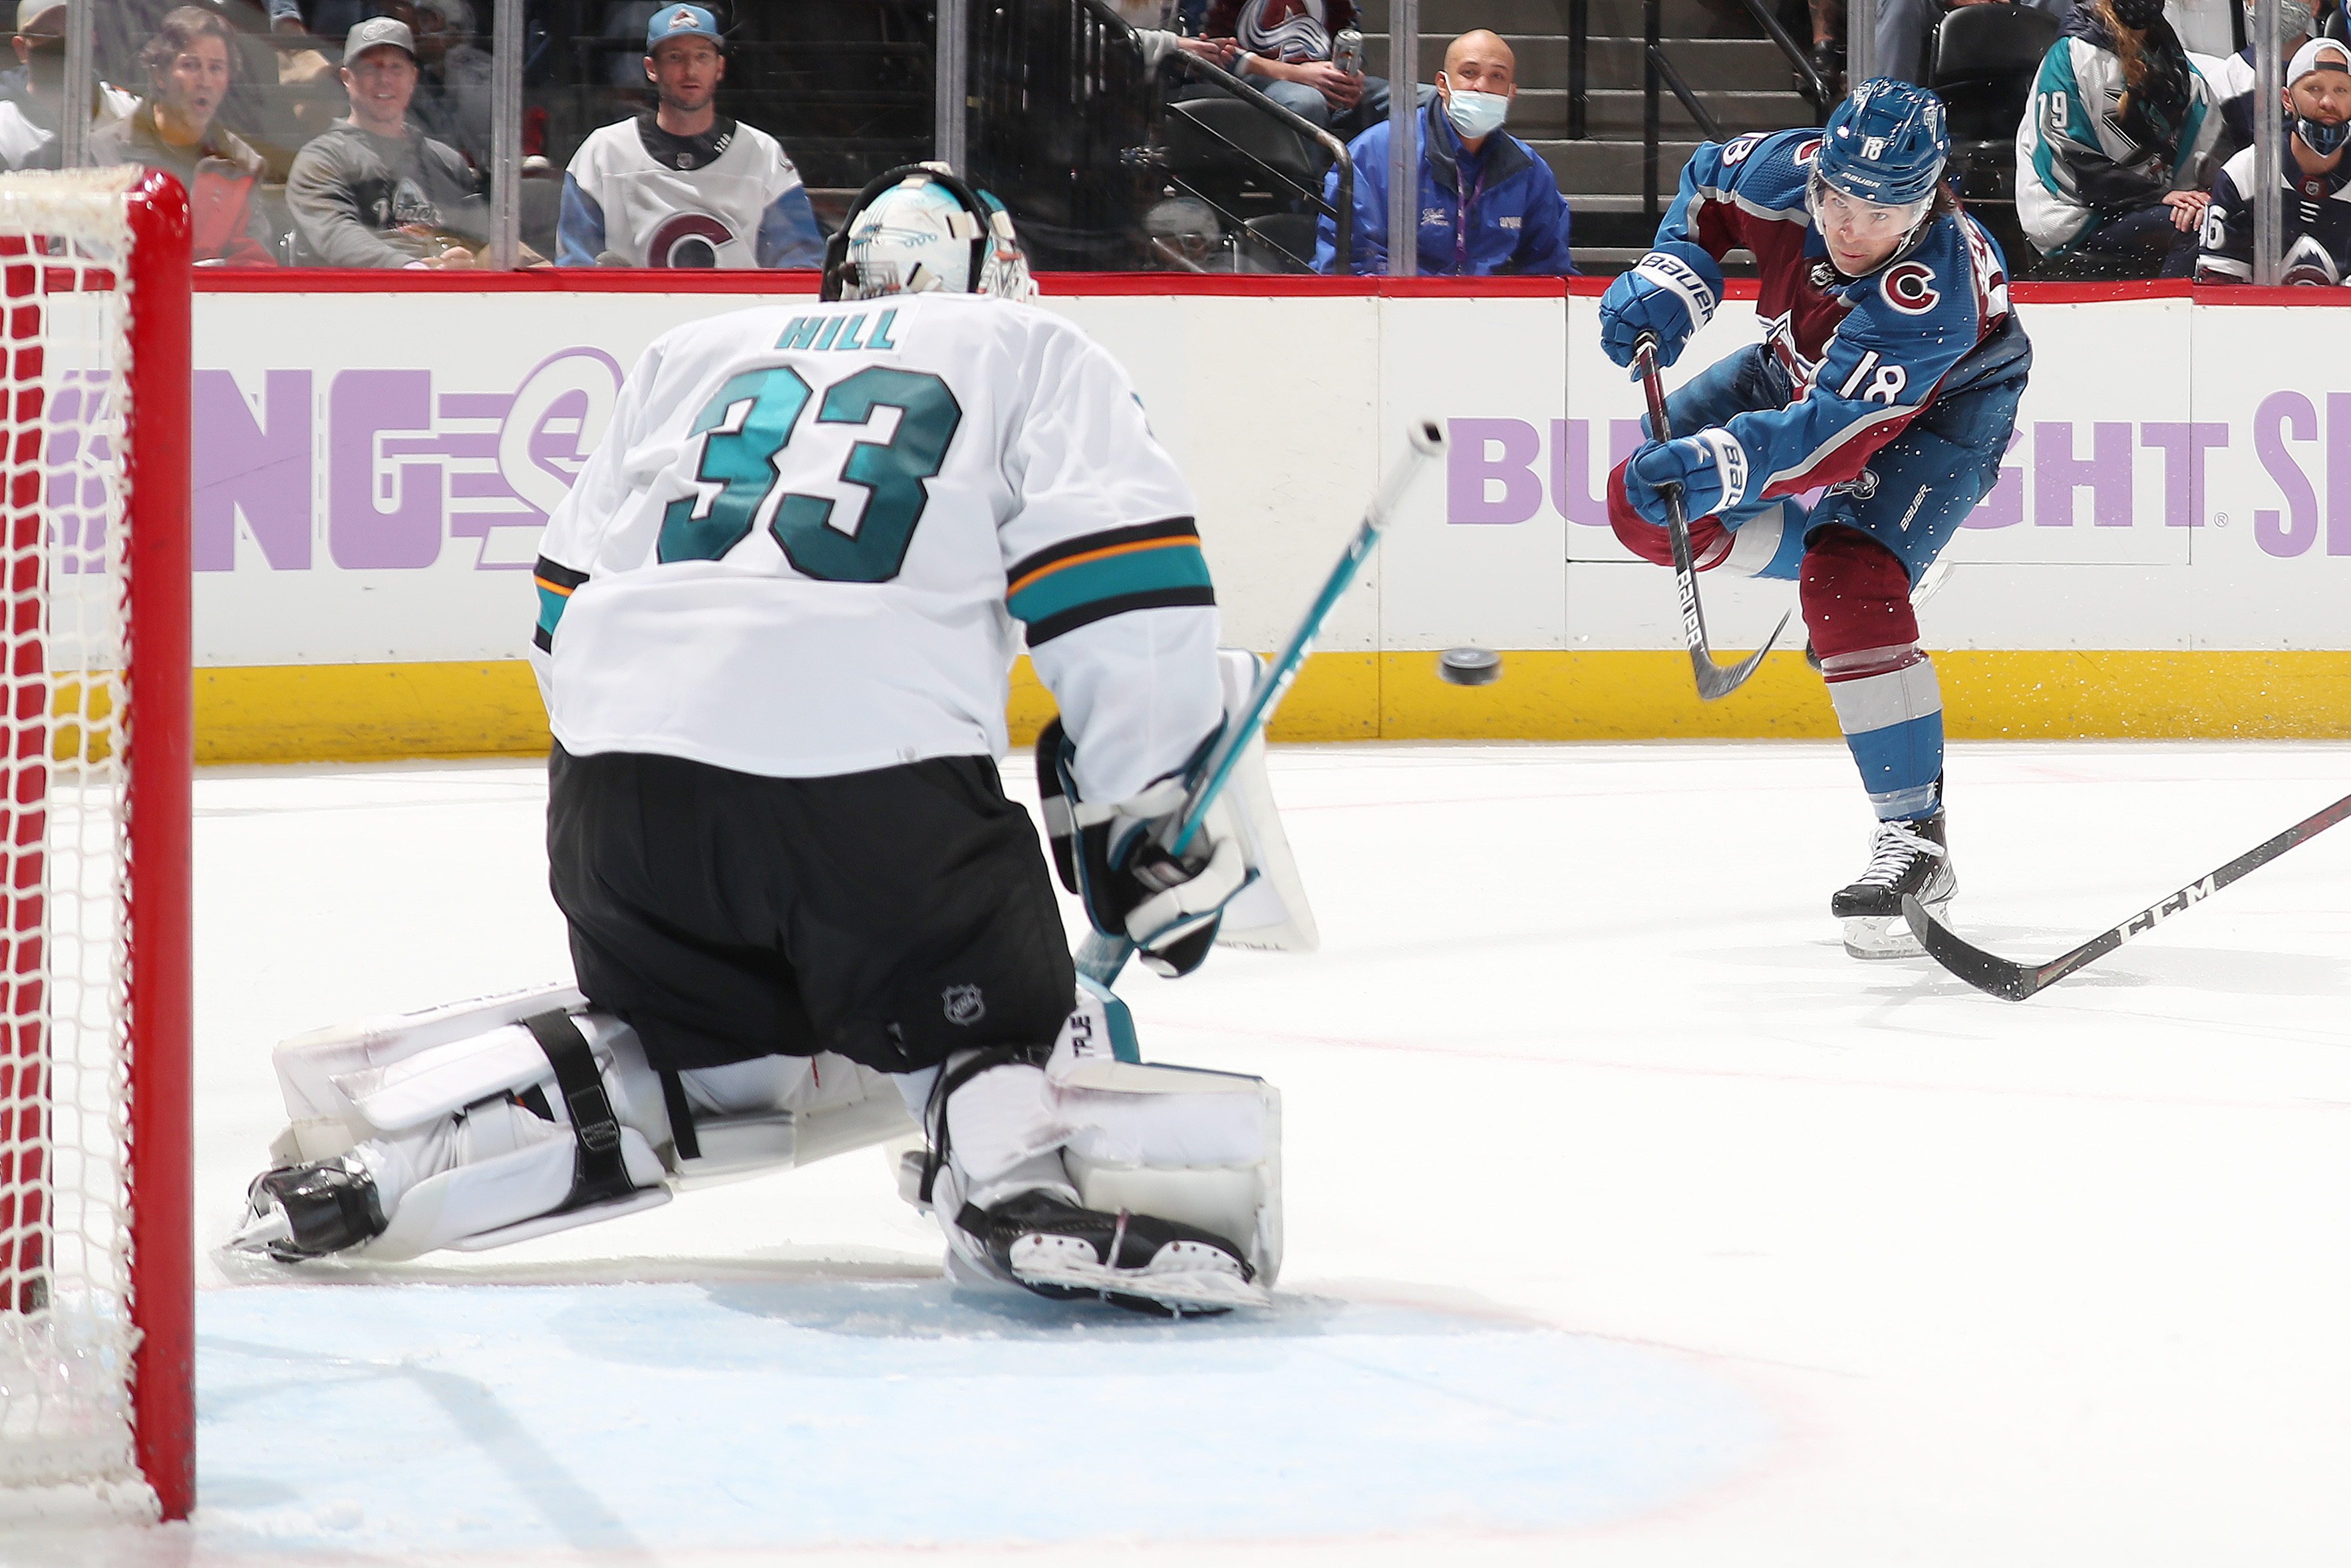 Girard Has Goal And 3 Assists To Help Avs Over Sharks, 6-2